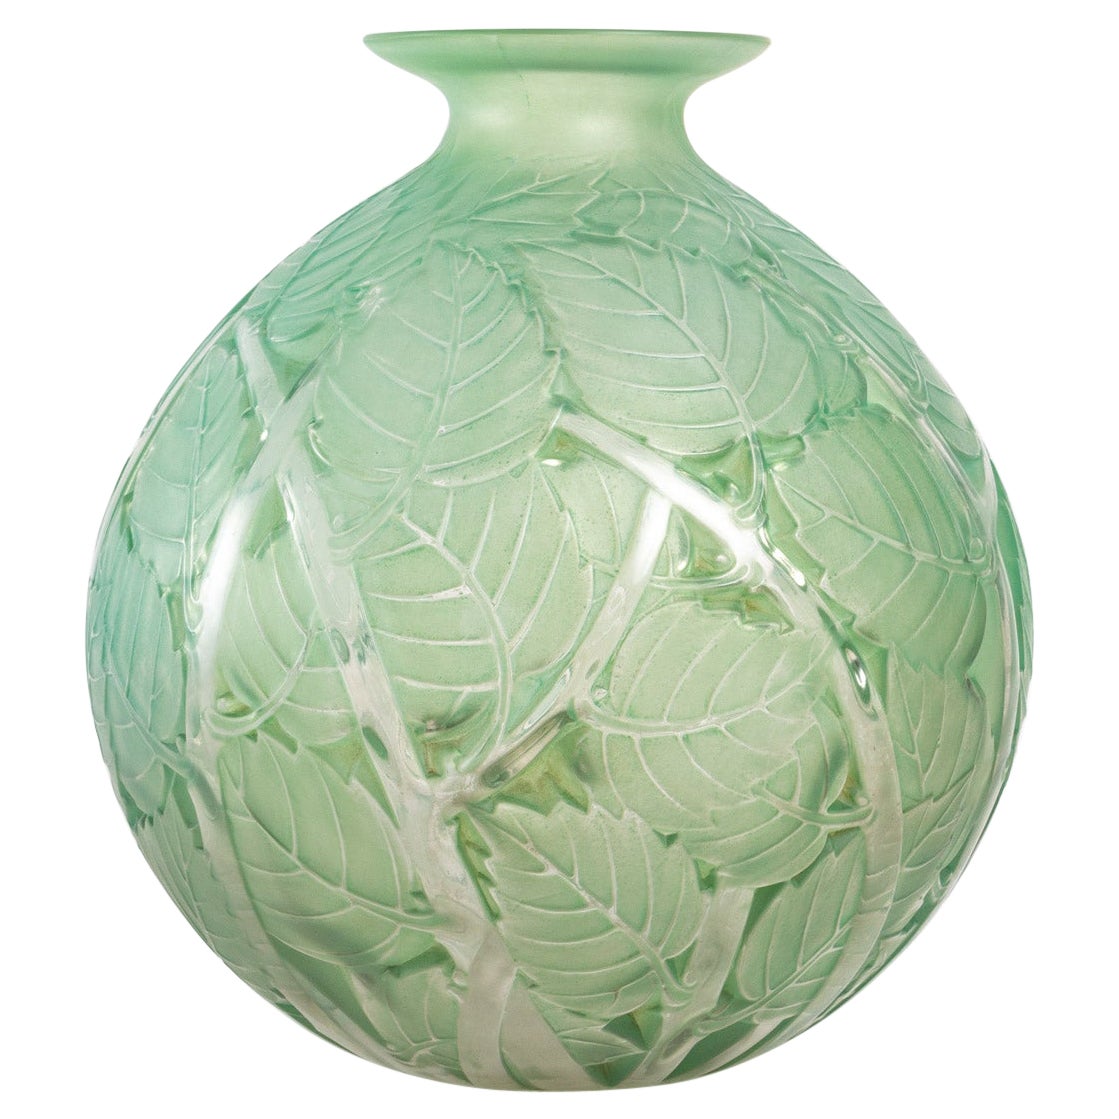 1929 René Lalique Milan Vase in Frosted Glass with Green Patina